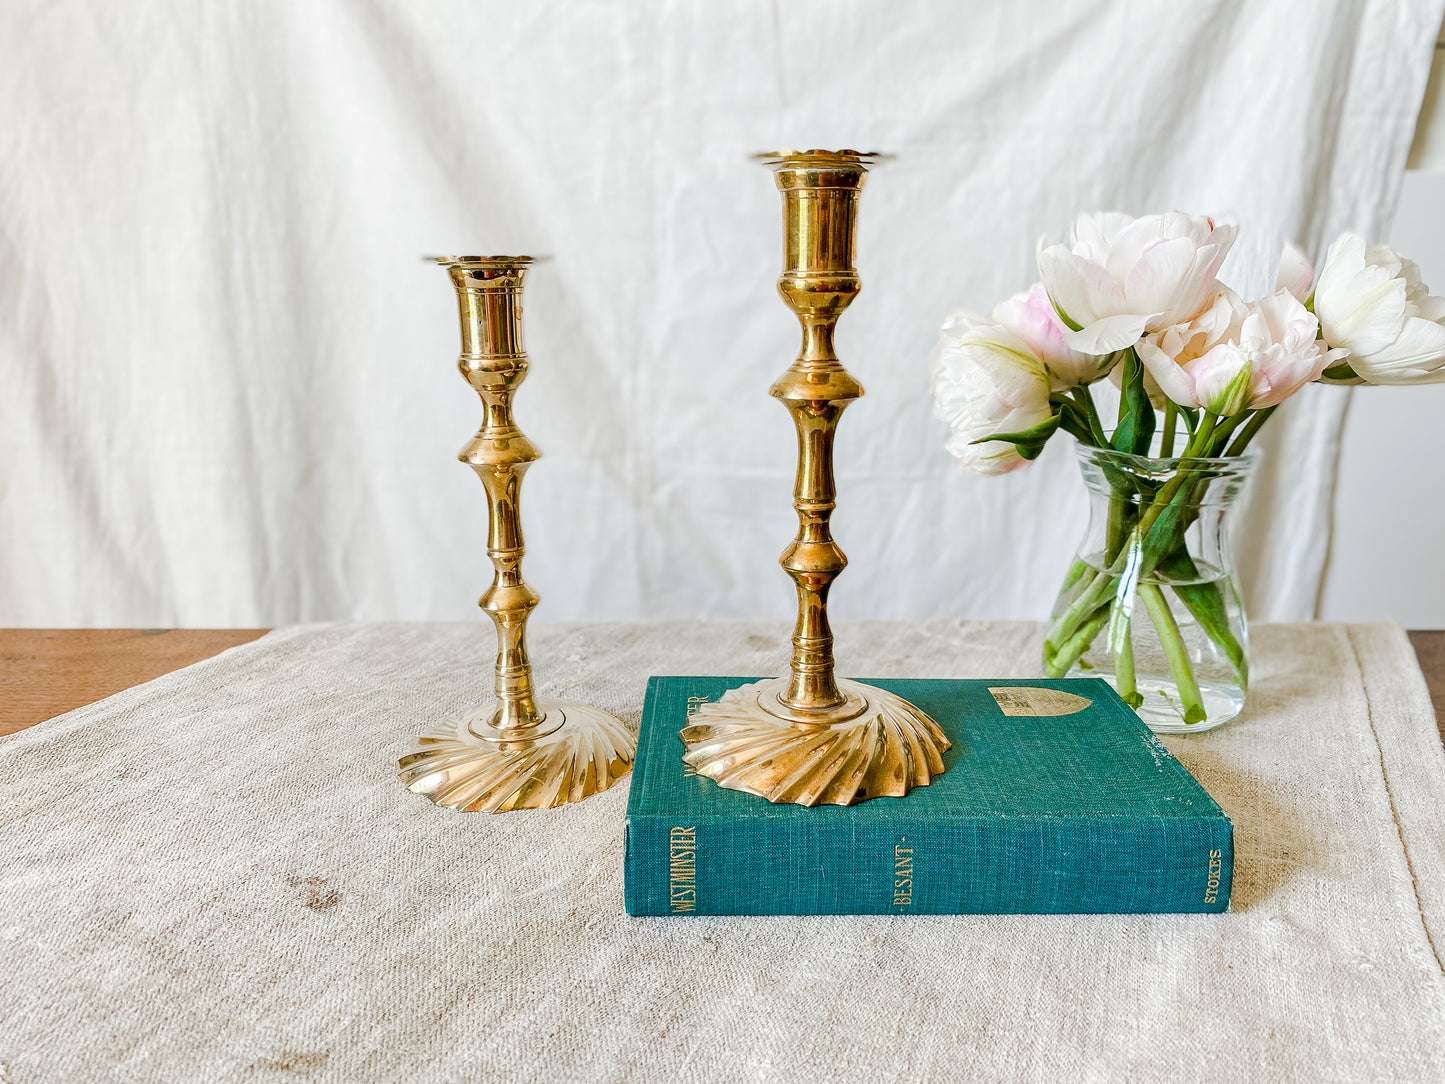 Vintage Brass Candlestick Holders with Swirl Bases | Matching Pair of Candle Holders | Traditional Wedding Decor